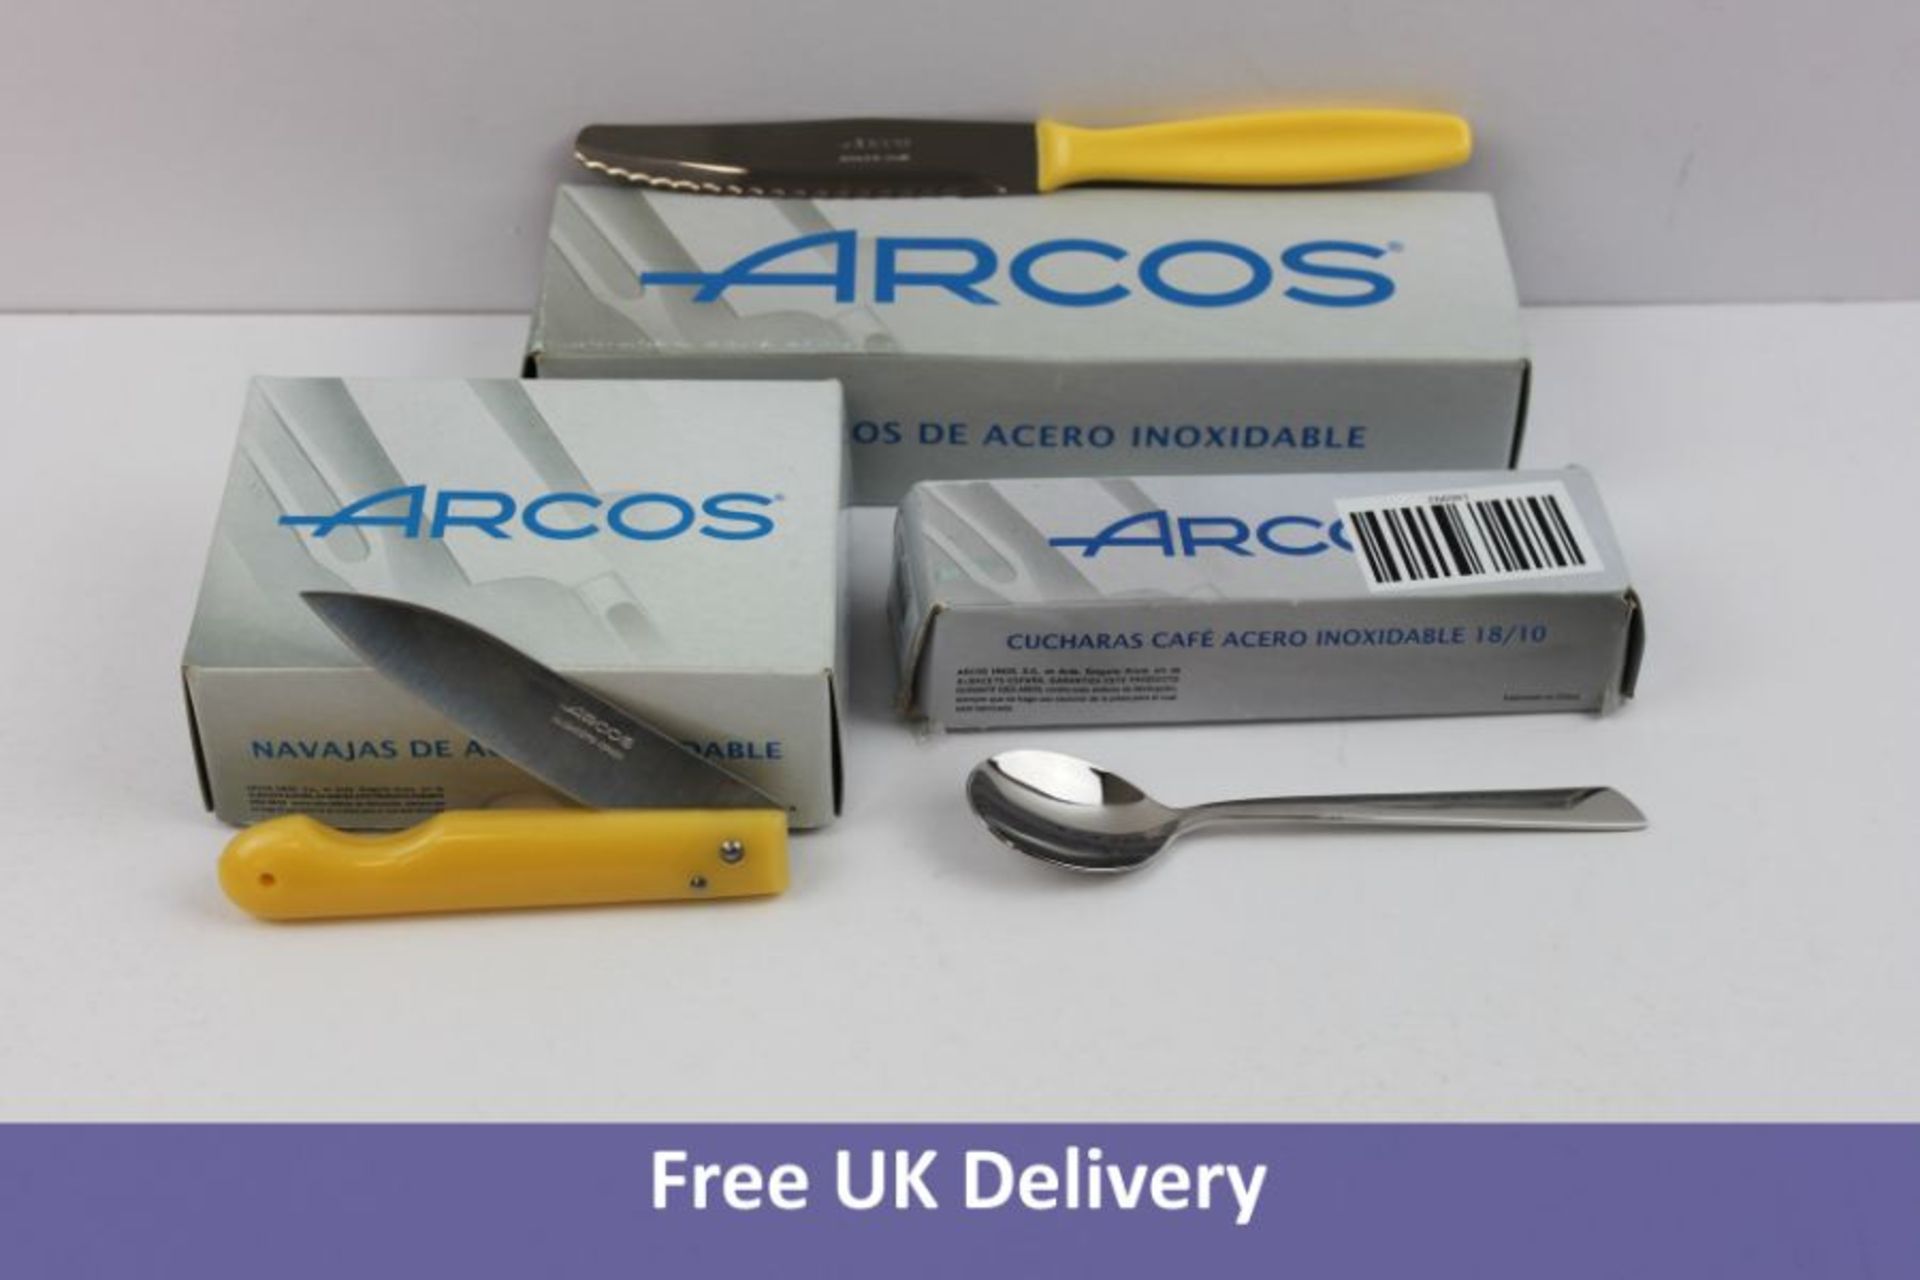 Three Sets of Arcos Products